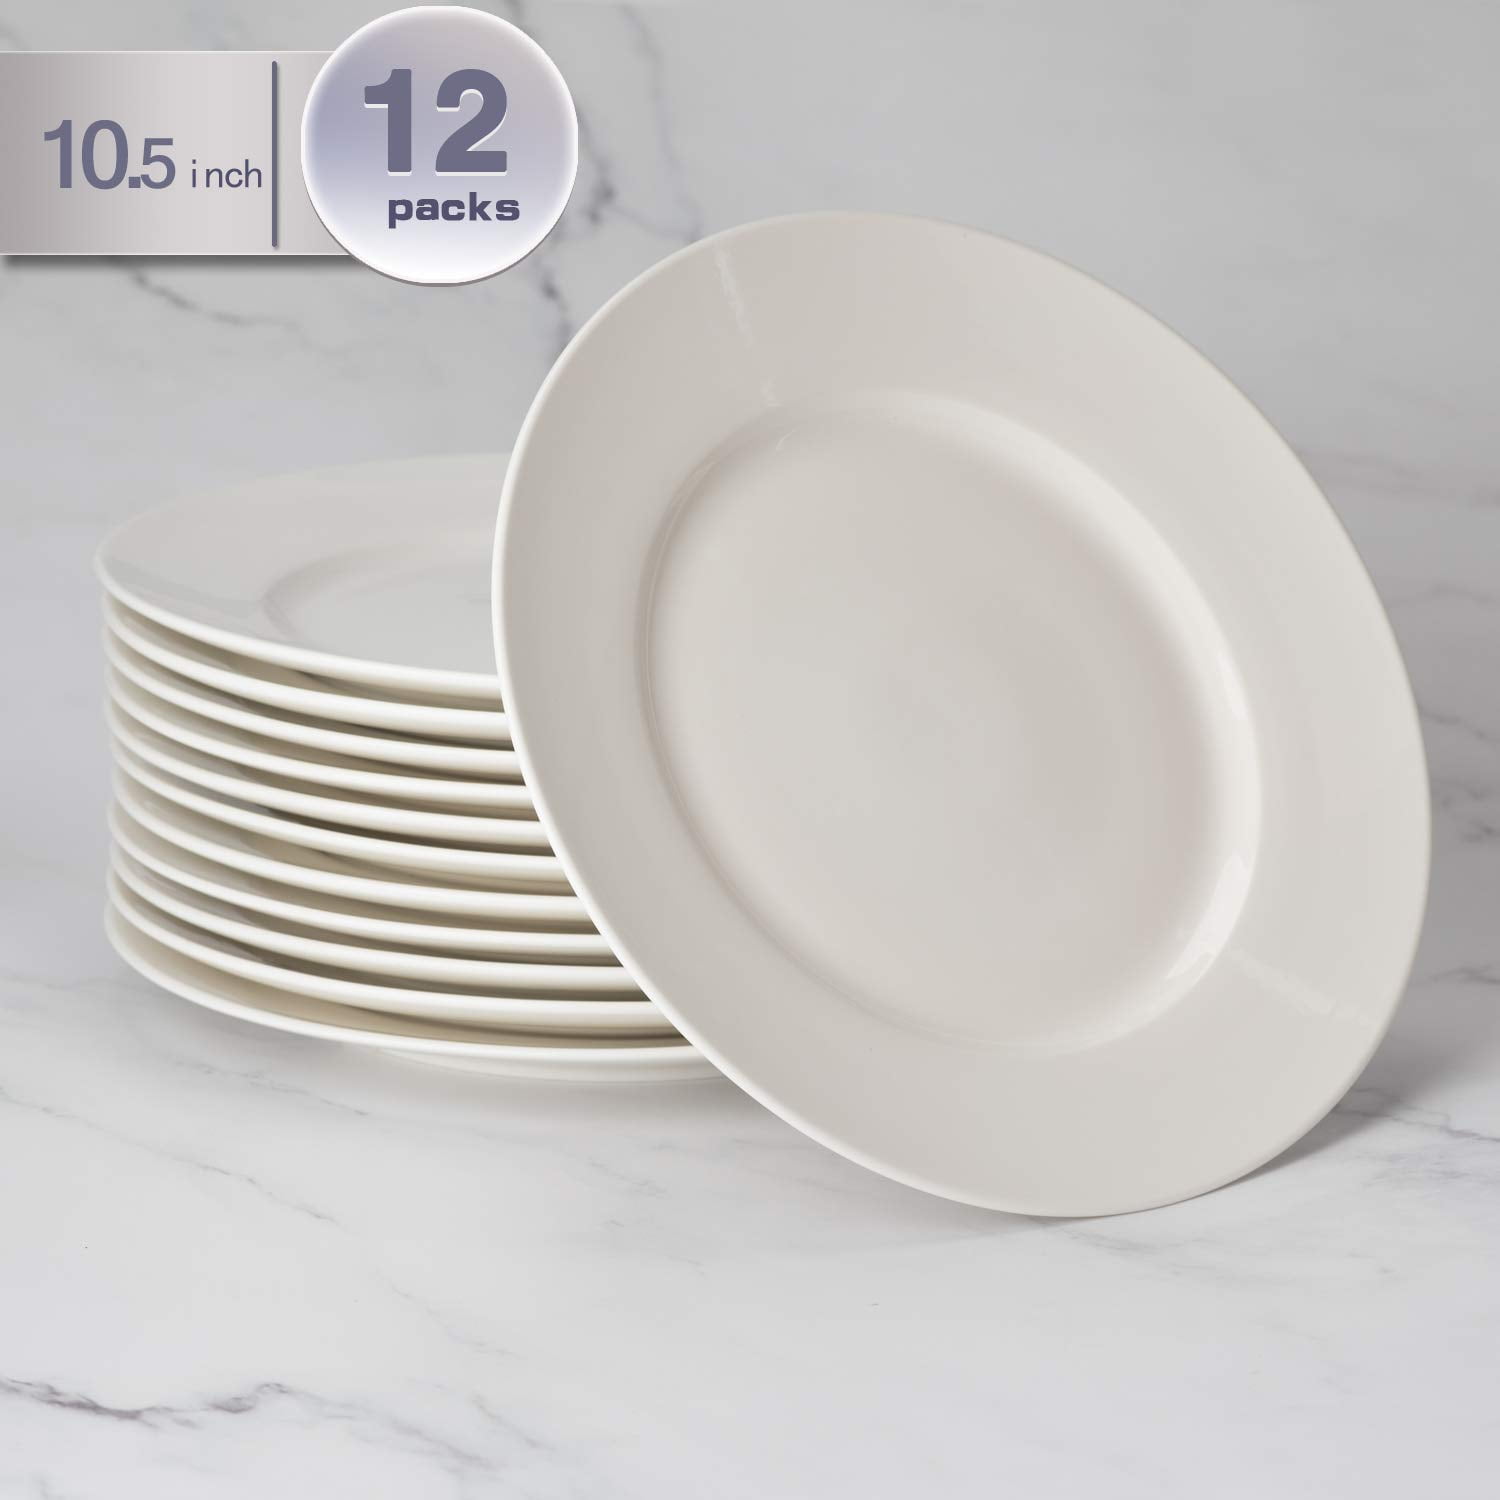 9-inch, White Dinnerware Sets Round Dessert or Salad Plate and Freezer Safe in Microwave amHomel 12-Piece Porcelain Dinner Plates Lead-Free Oven